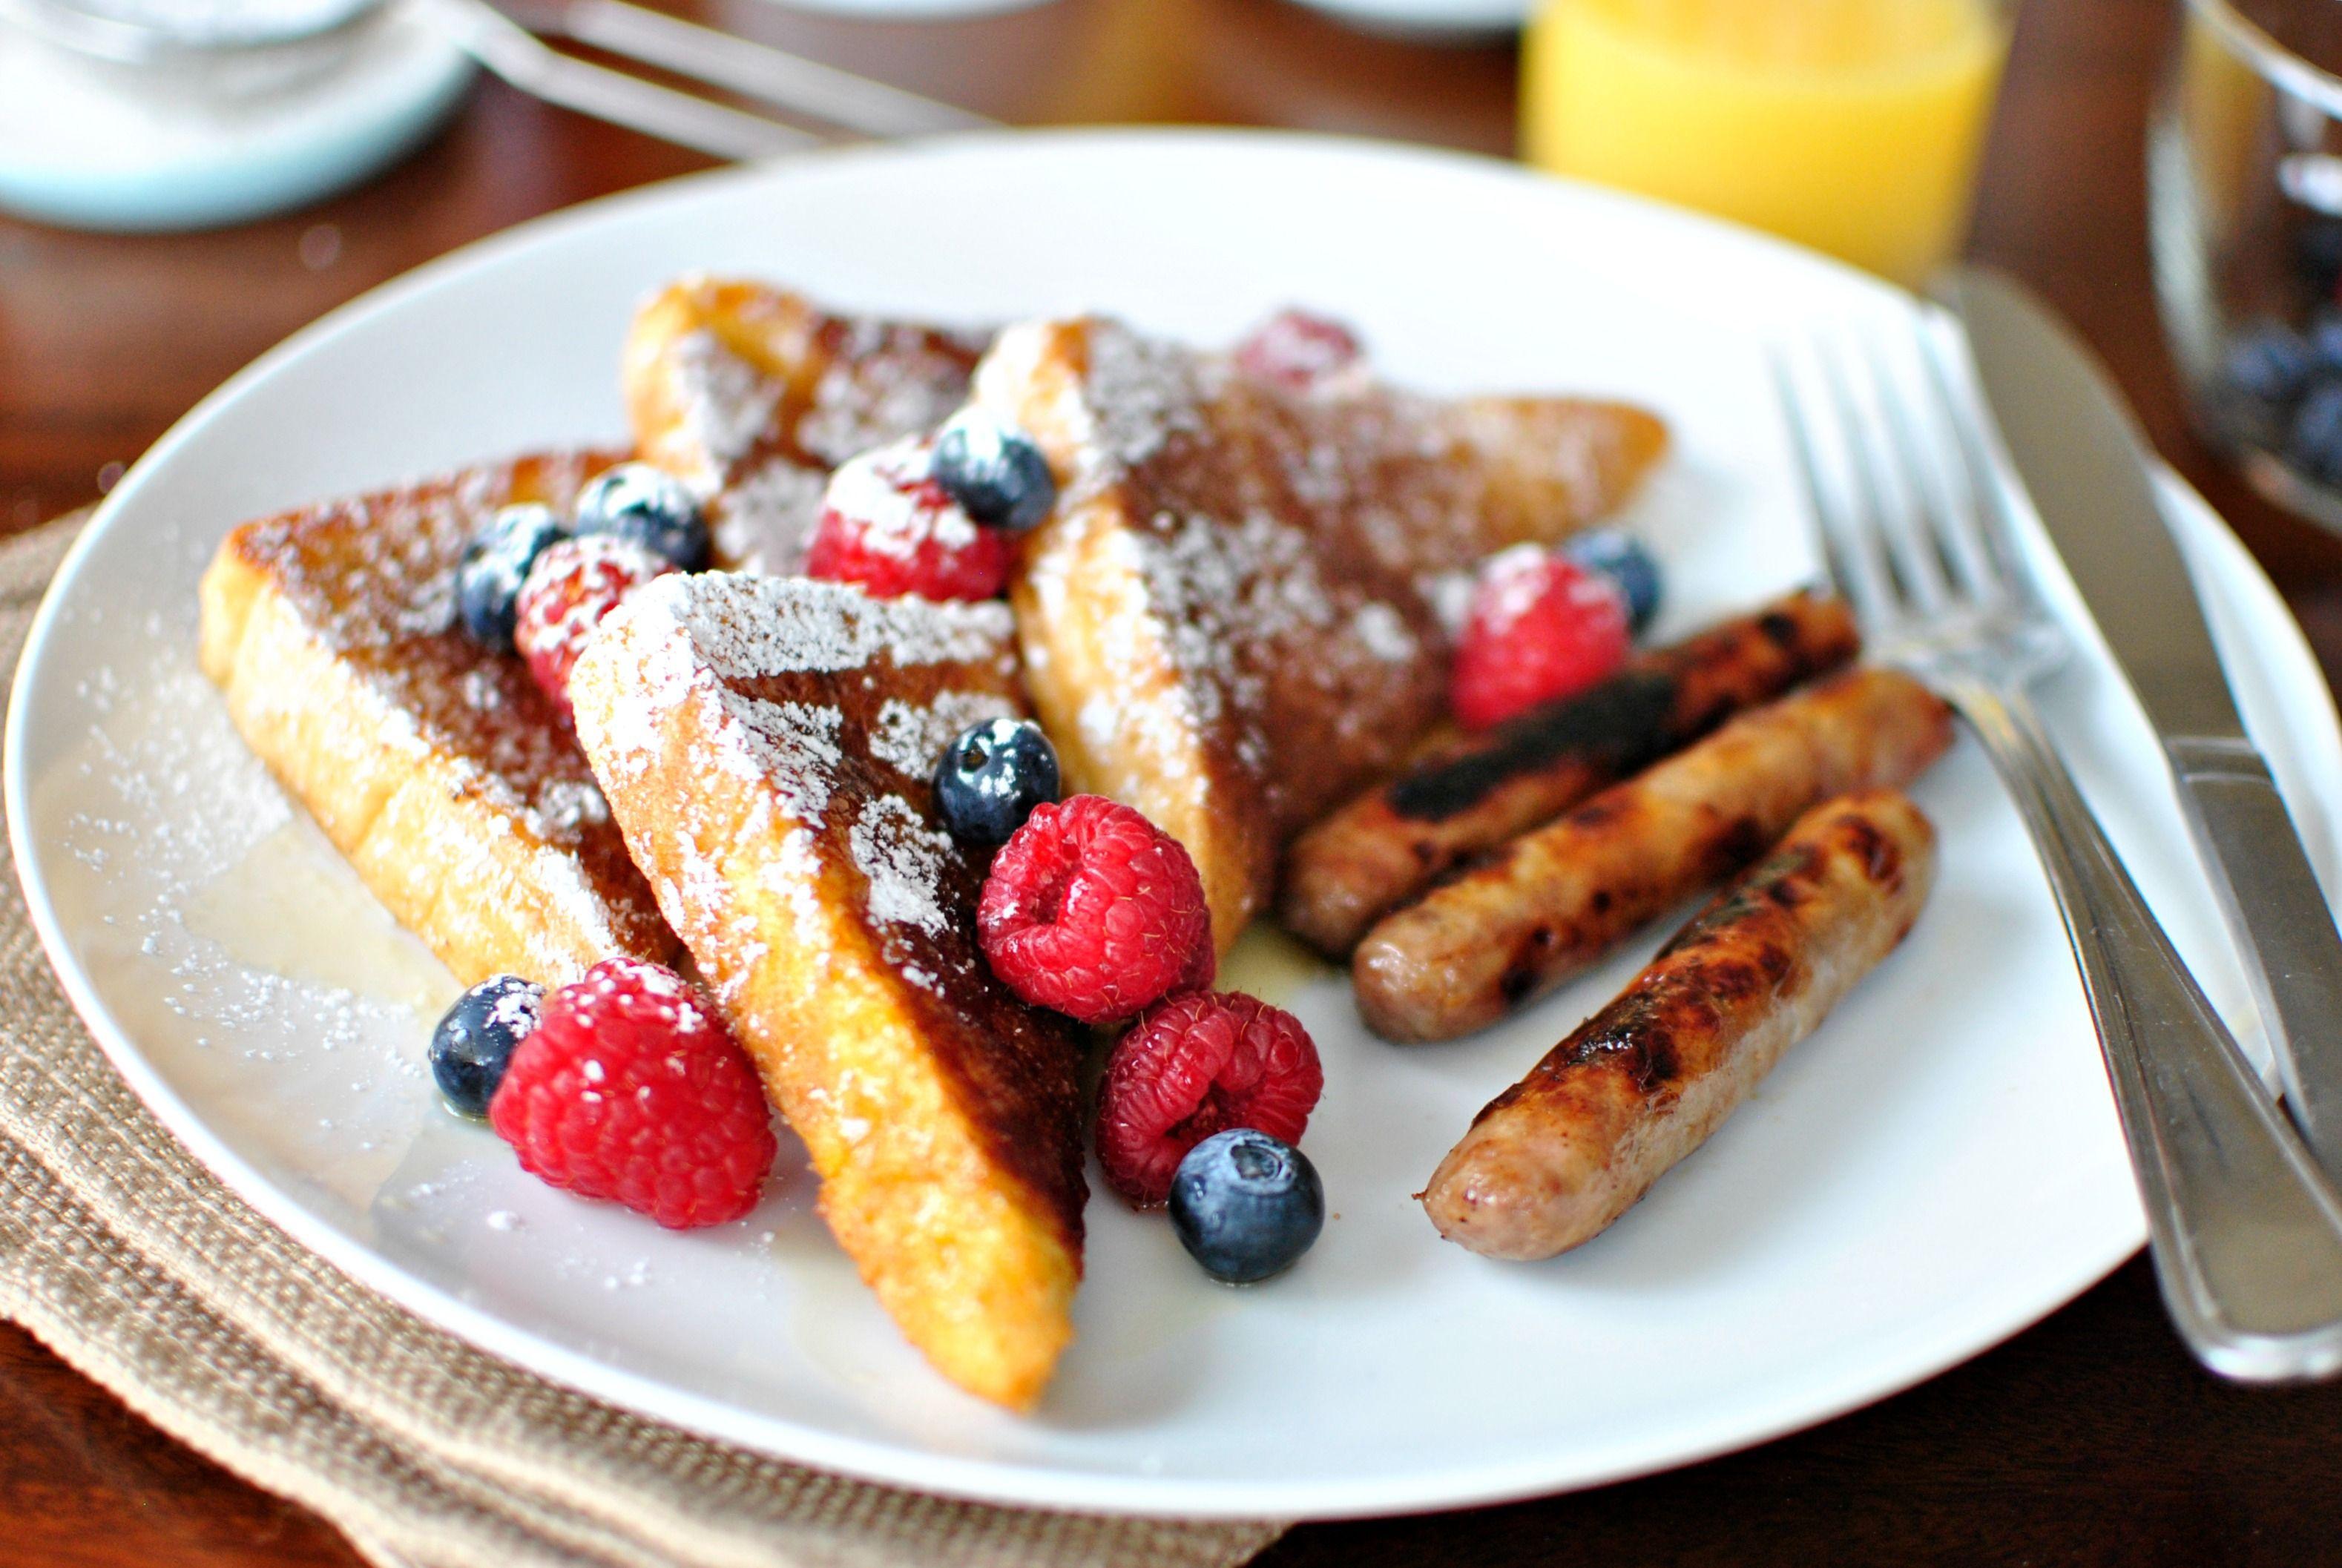 French toast Wallpaper Image Photo Picture Background